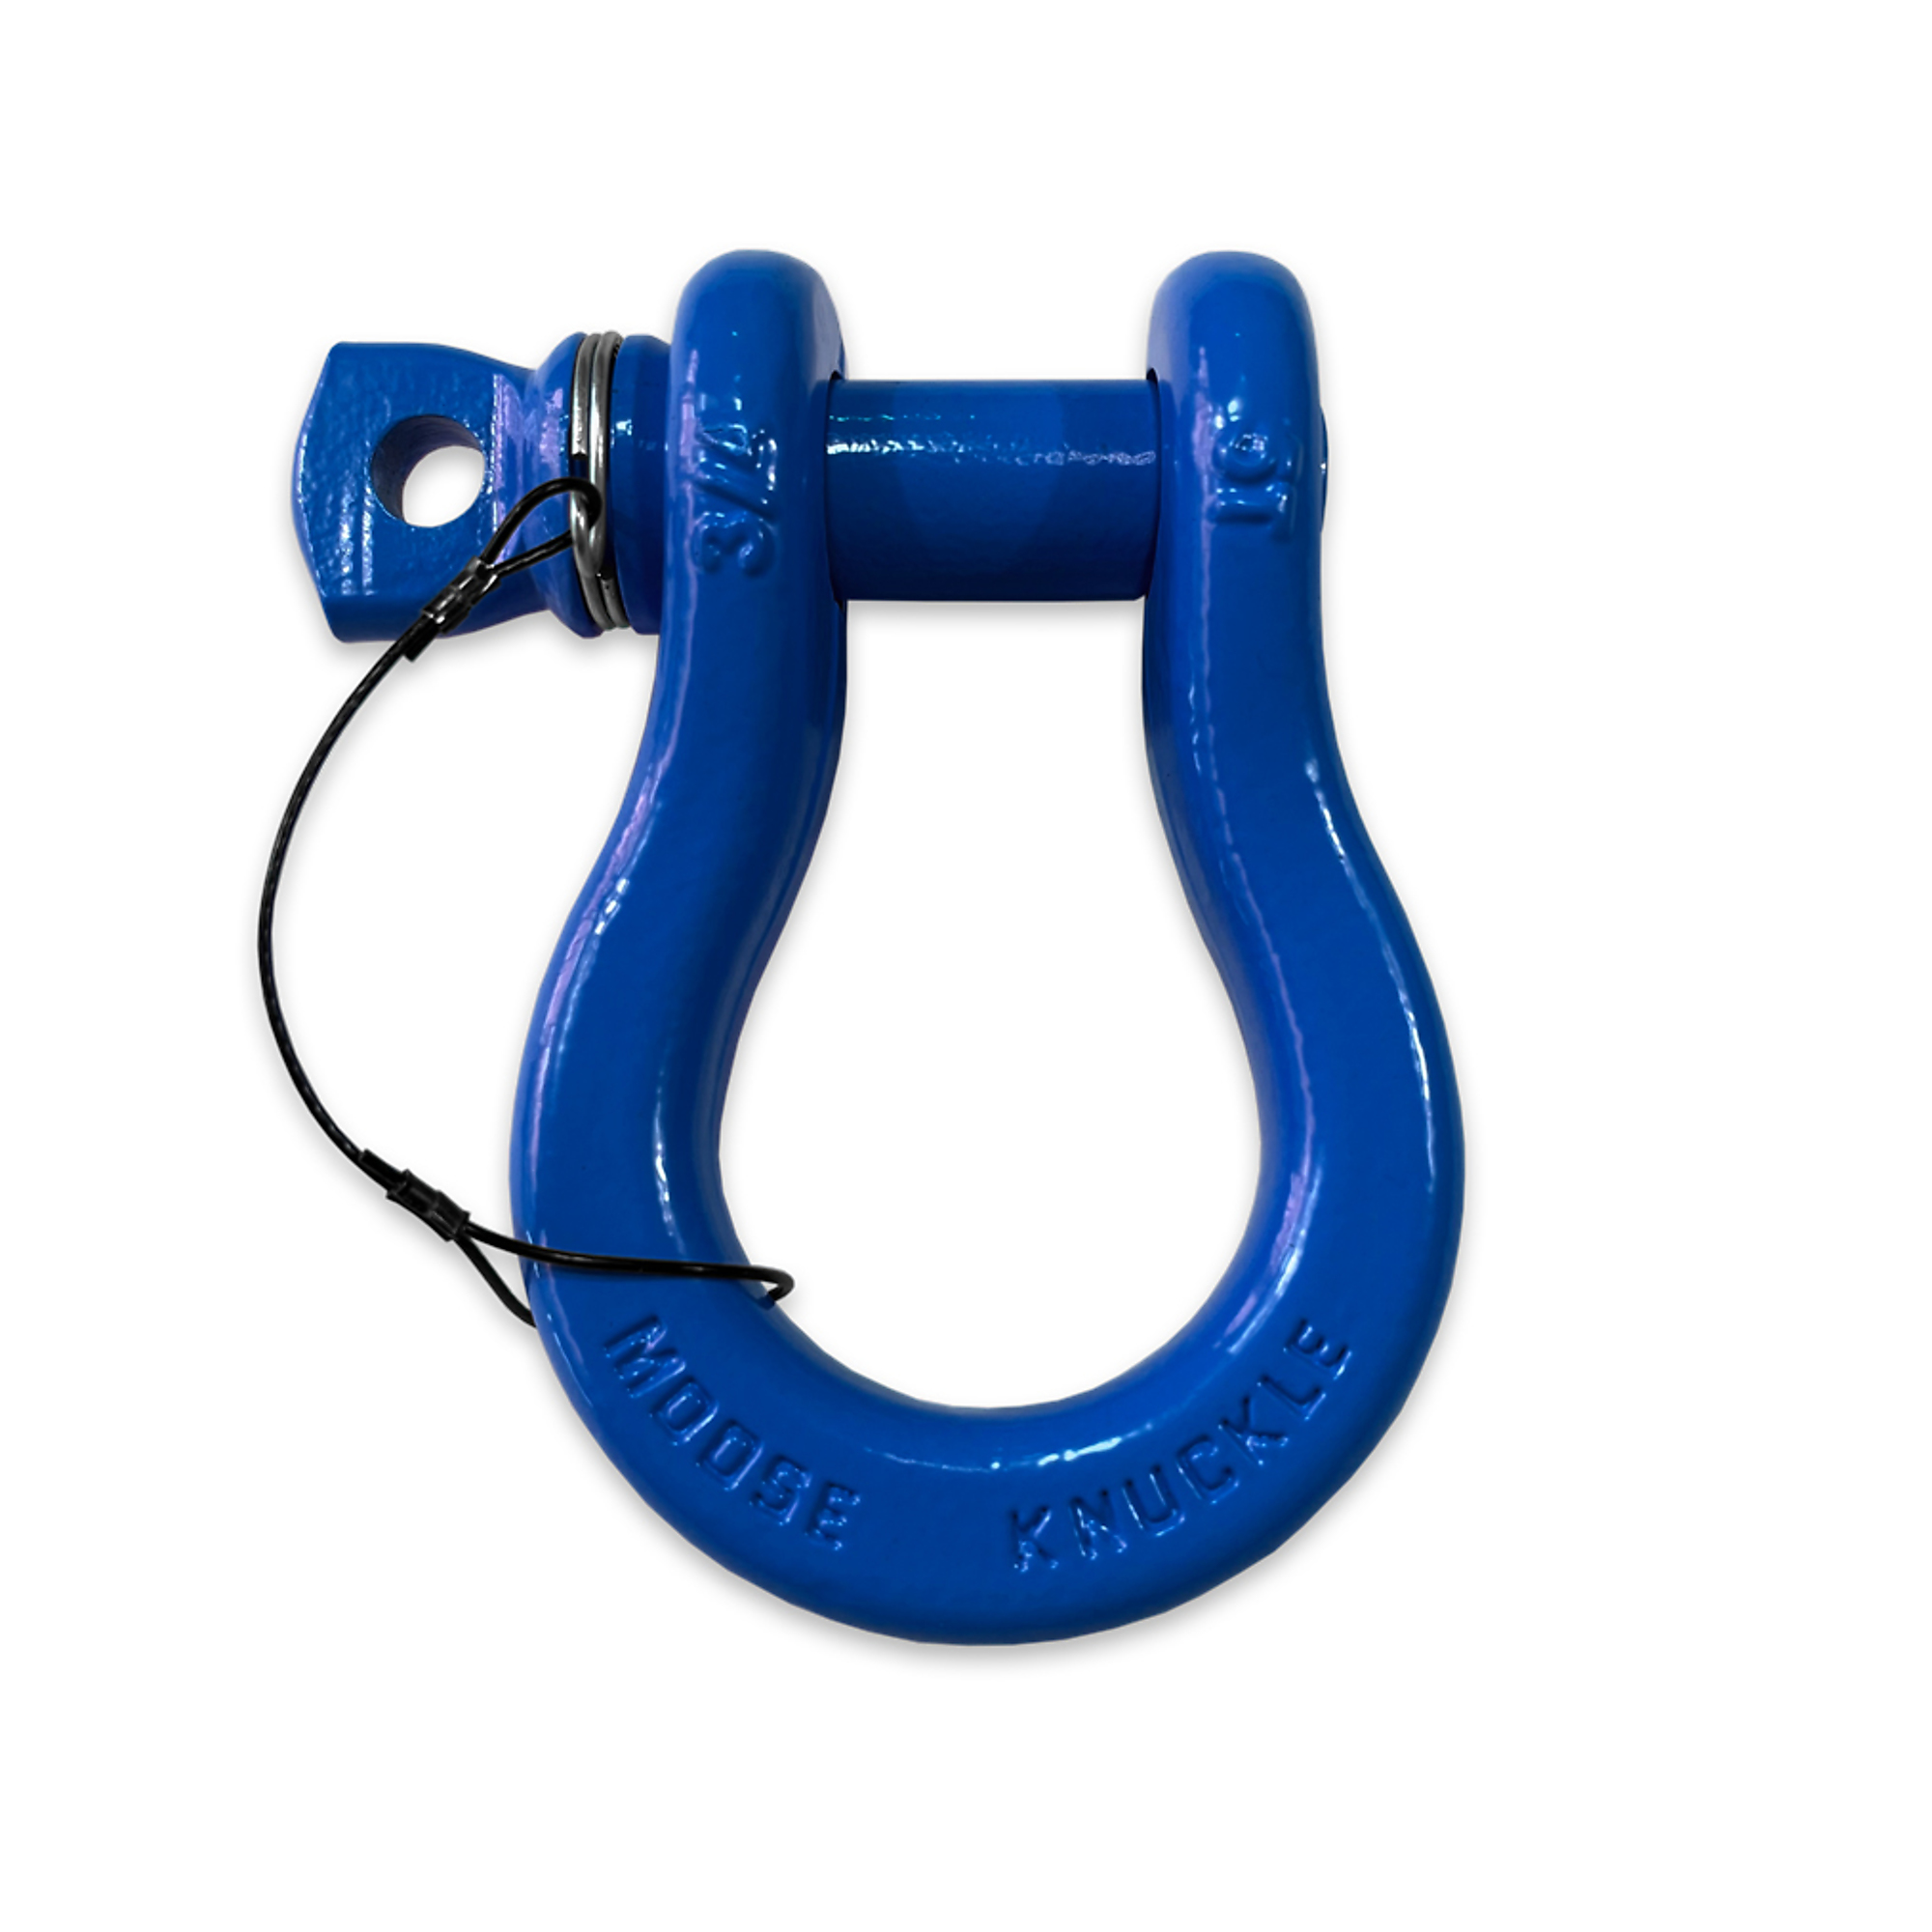 Moose Knuckle Offroad, Blue Balls Recovery Tow Lanyard Spin Pin 3/4 Shackle, Working Load Limit 10000 lb, Model FN000023-005